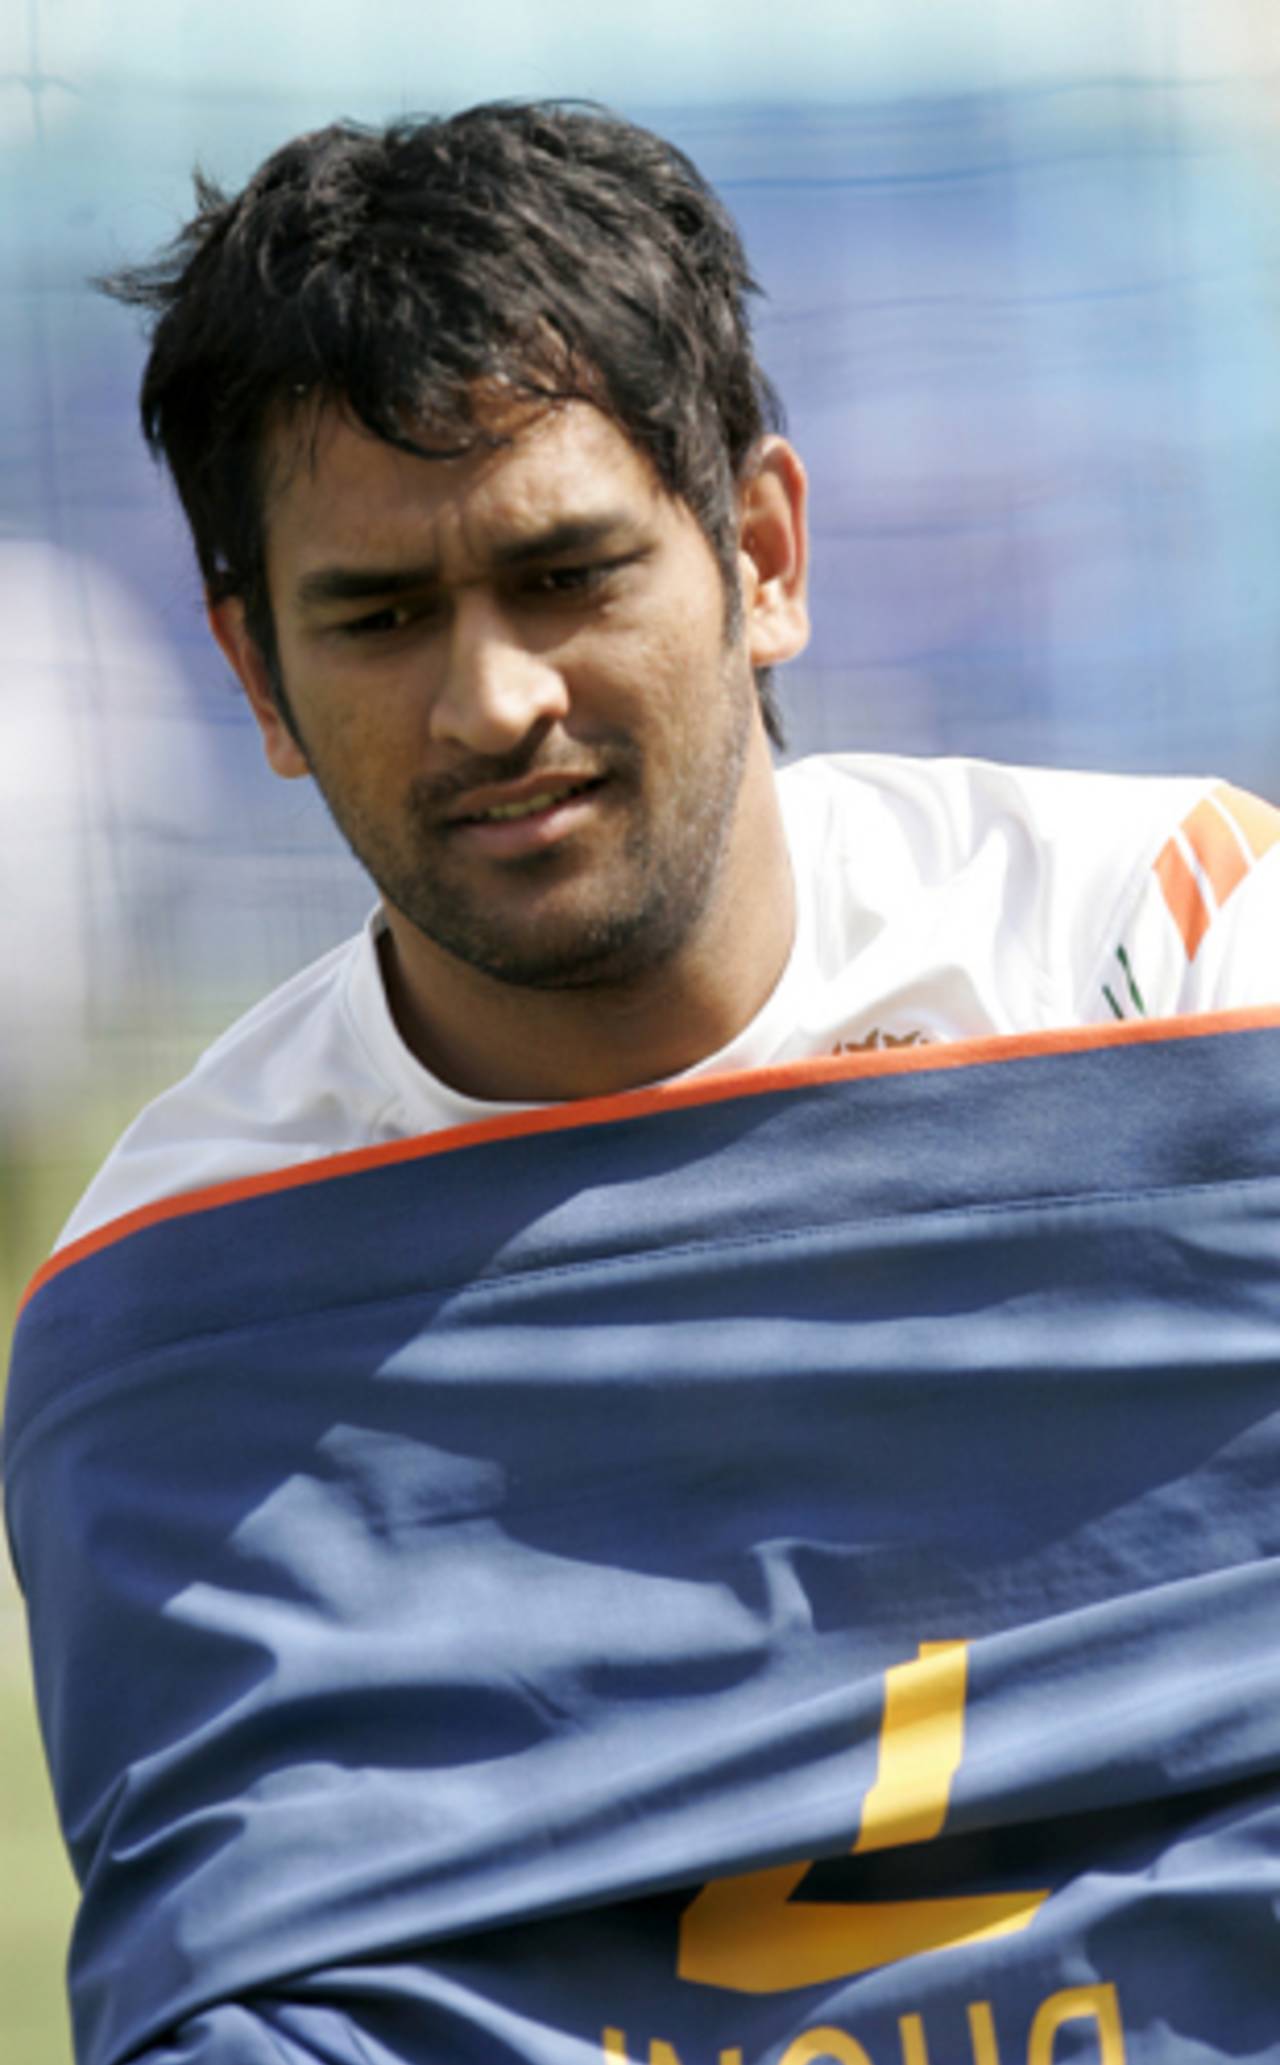 MS Dhoni at India's training session, Lord's, June 11, 2009